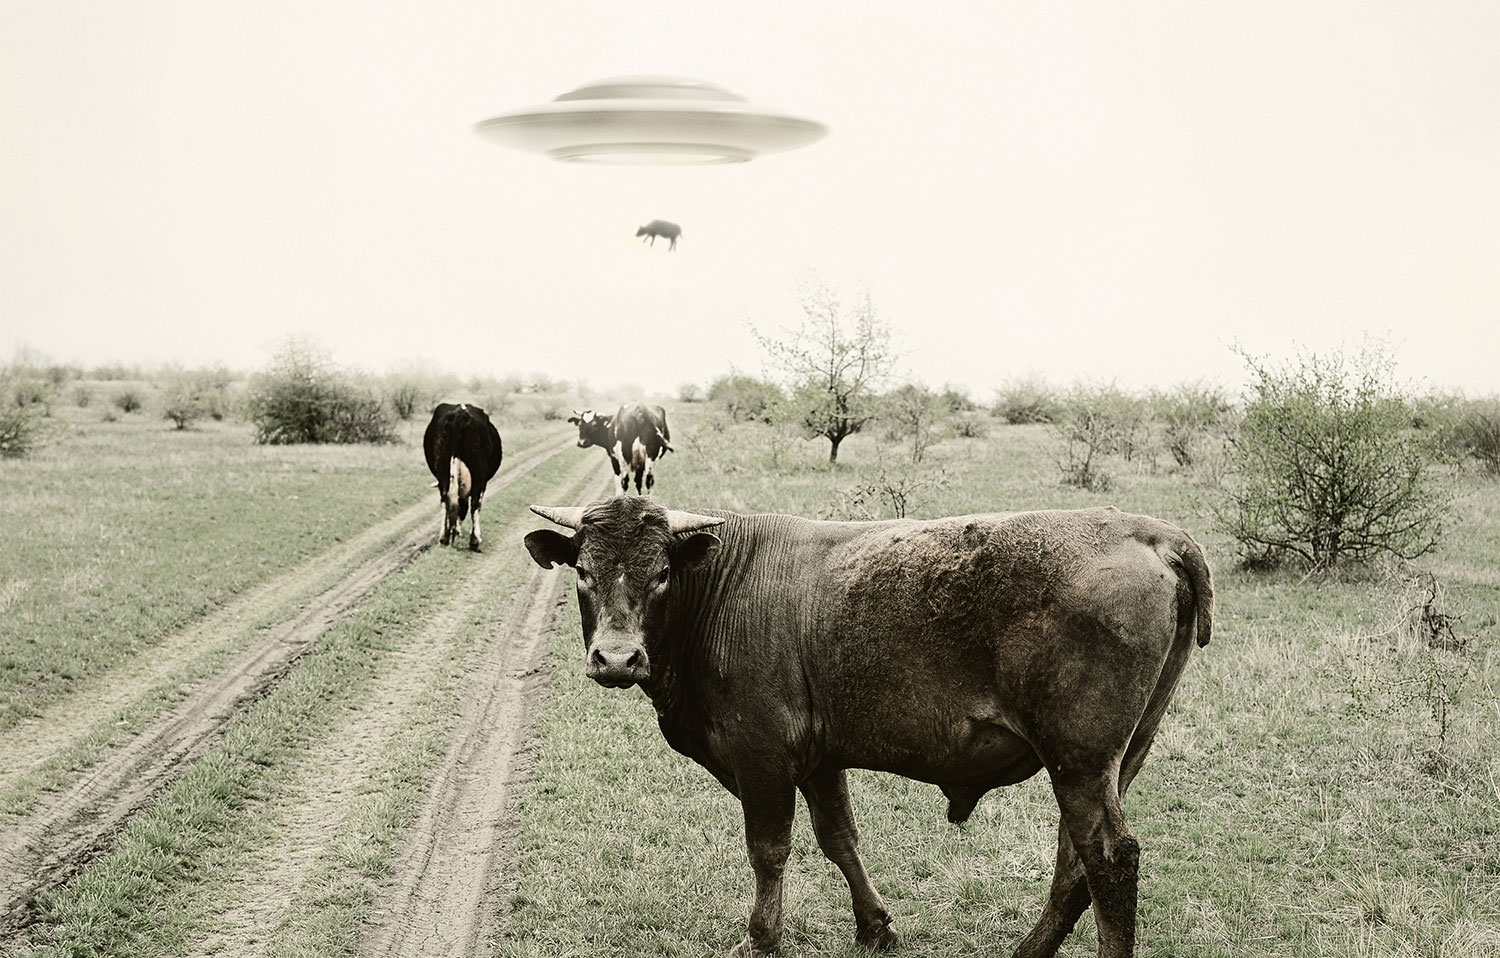 Cows in a pasture. The cow in the foreground is looking at the camera. In the far distance, a cow is being beamed up to a UFO.